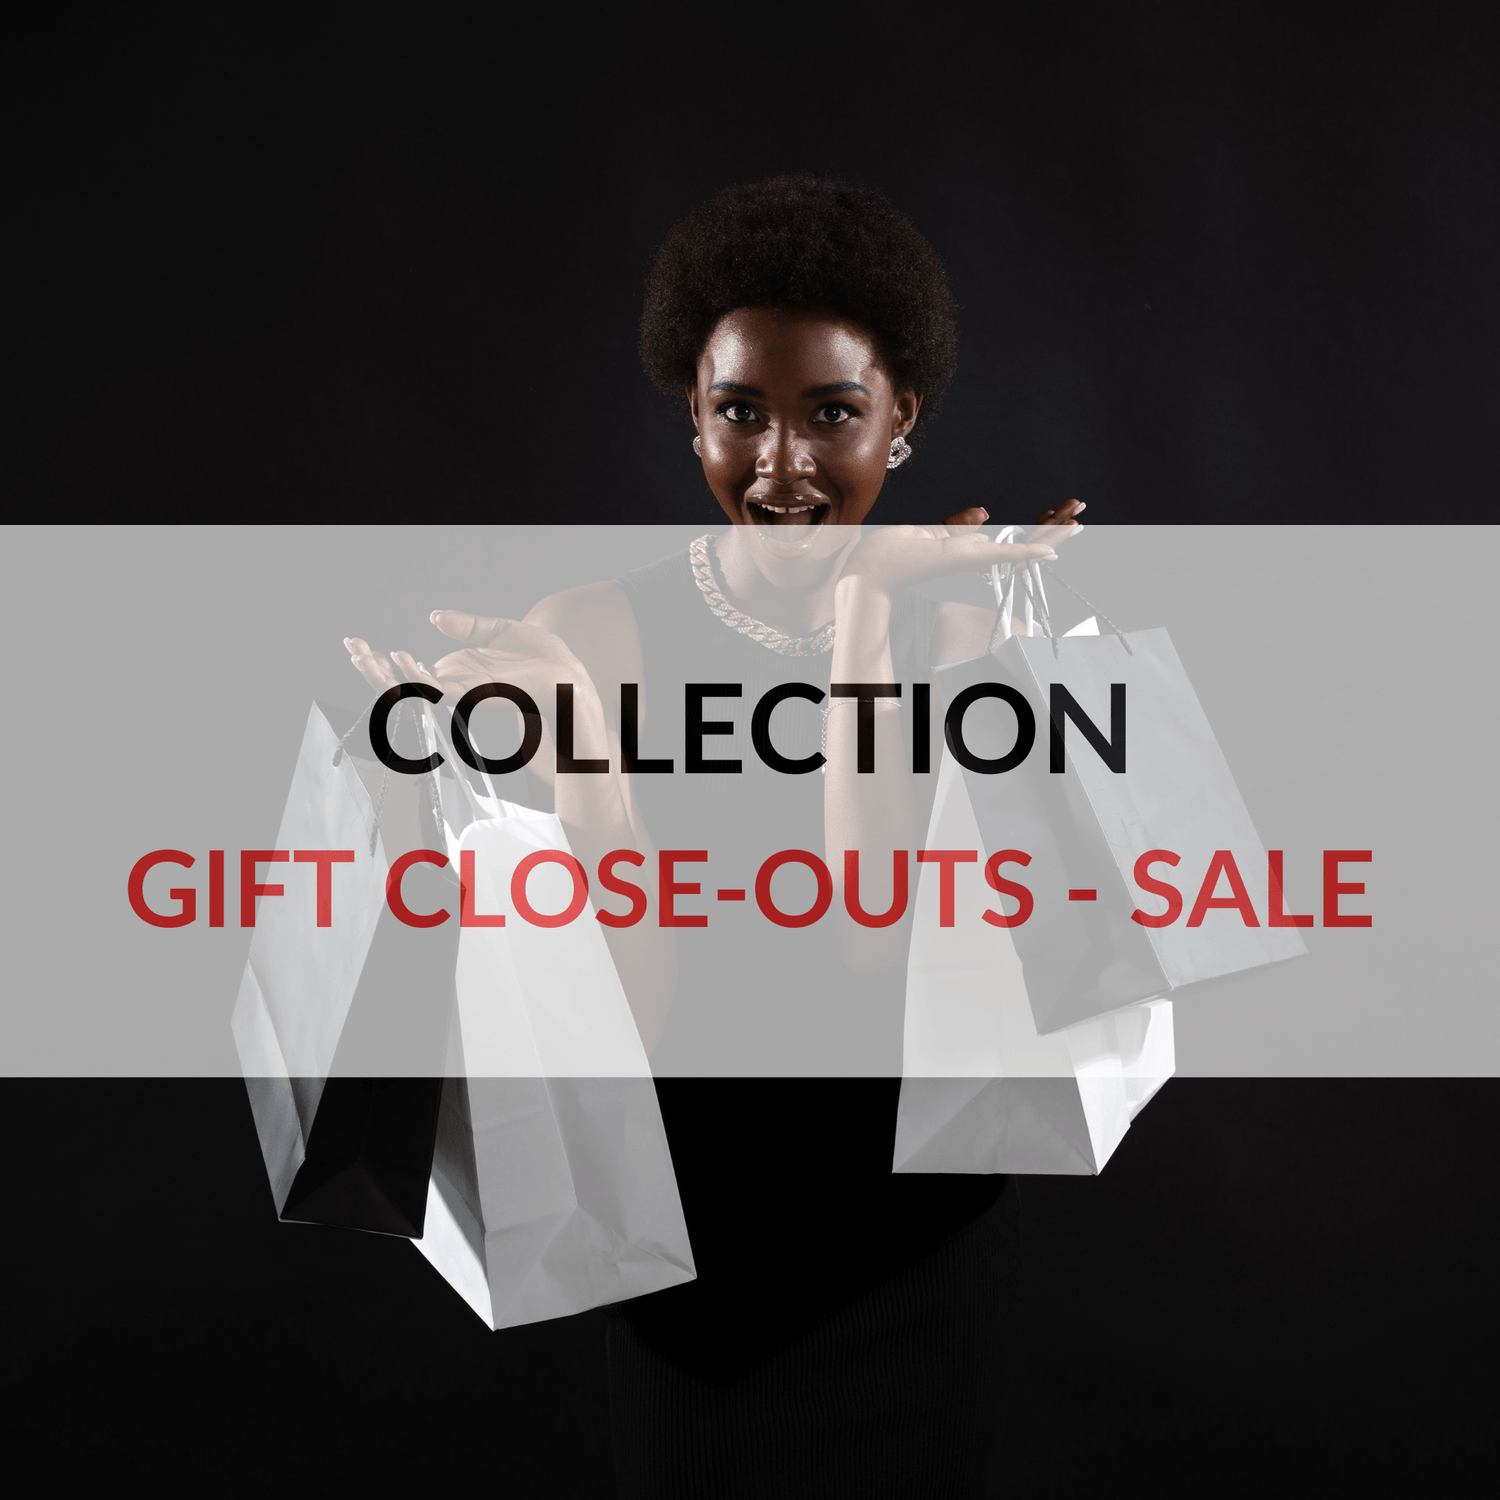 Gift Close-outs Sale, Essentialgifting.com